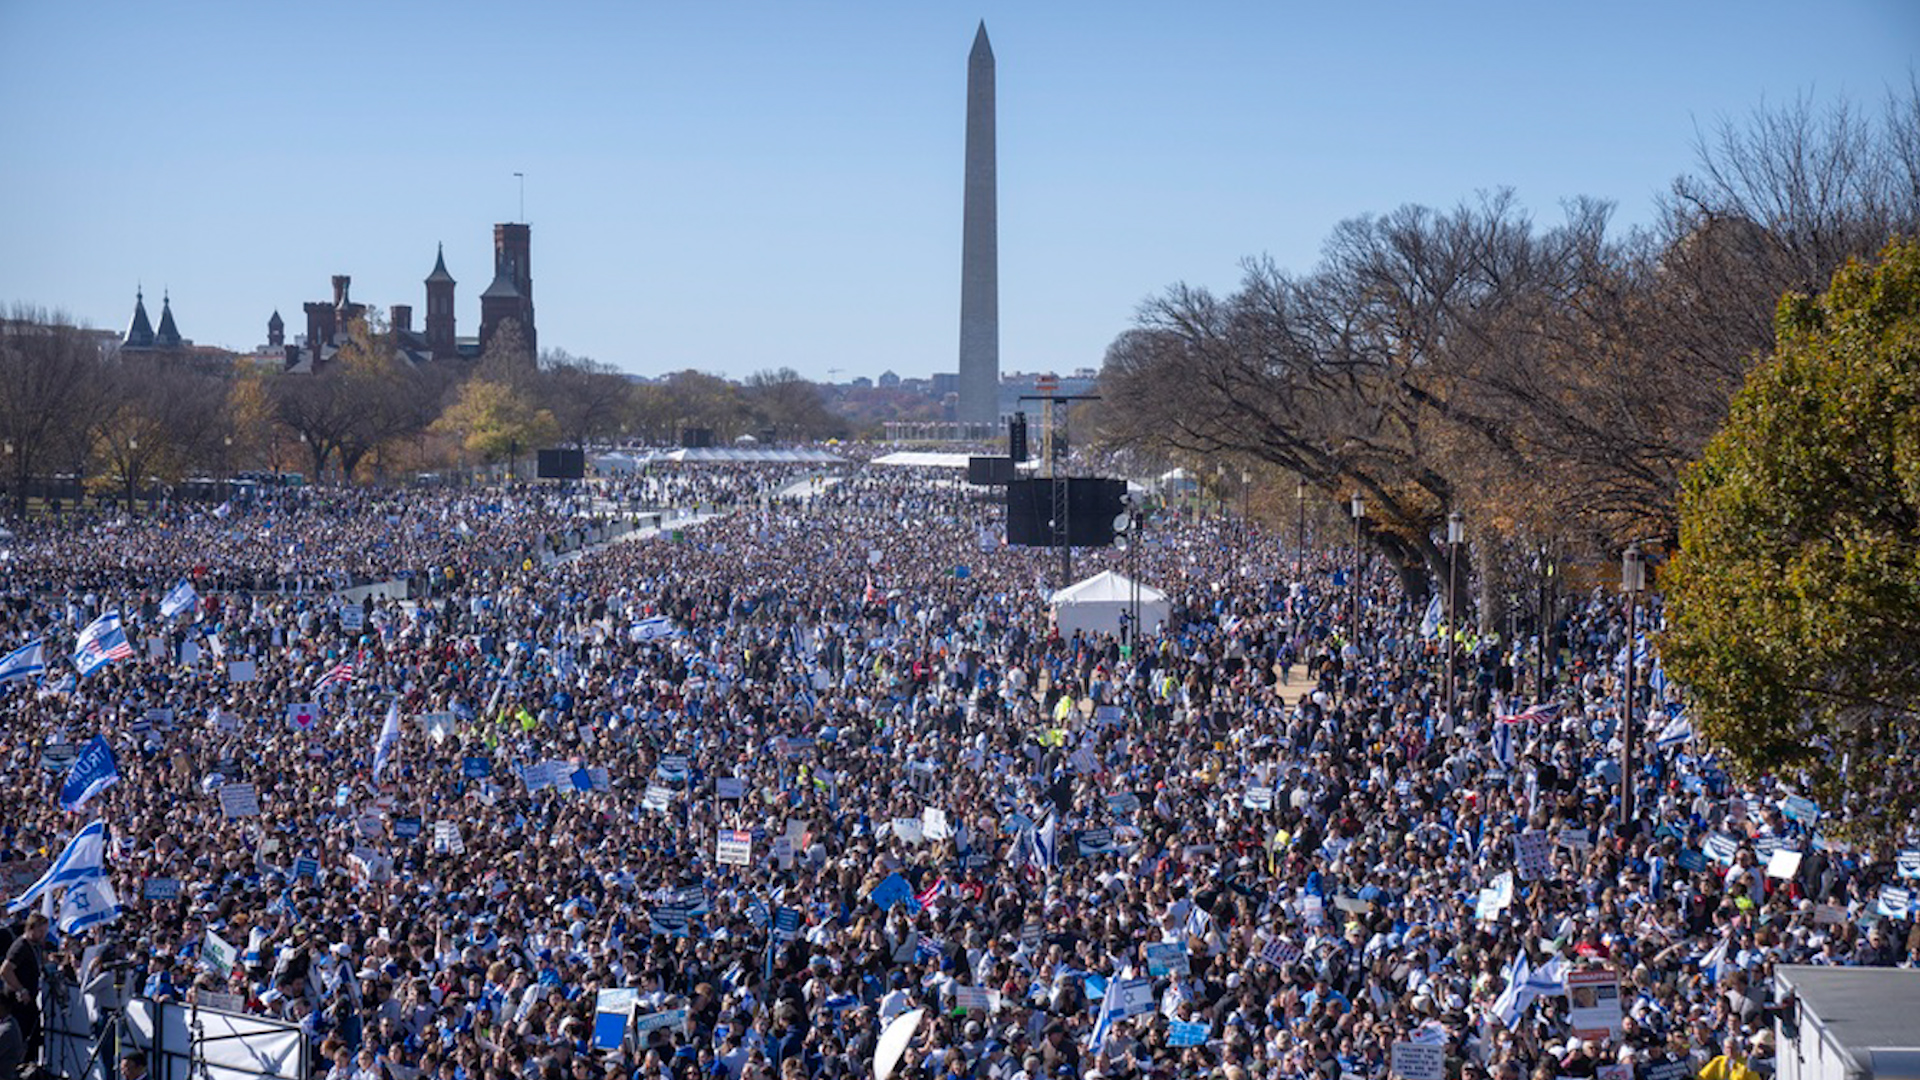 Tens of thousands gathered at the National Mall in a show of solidarity with Israel as it wages war in Gaza.